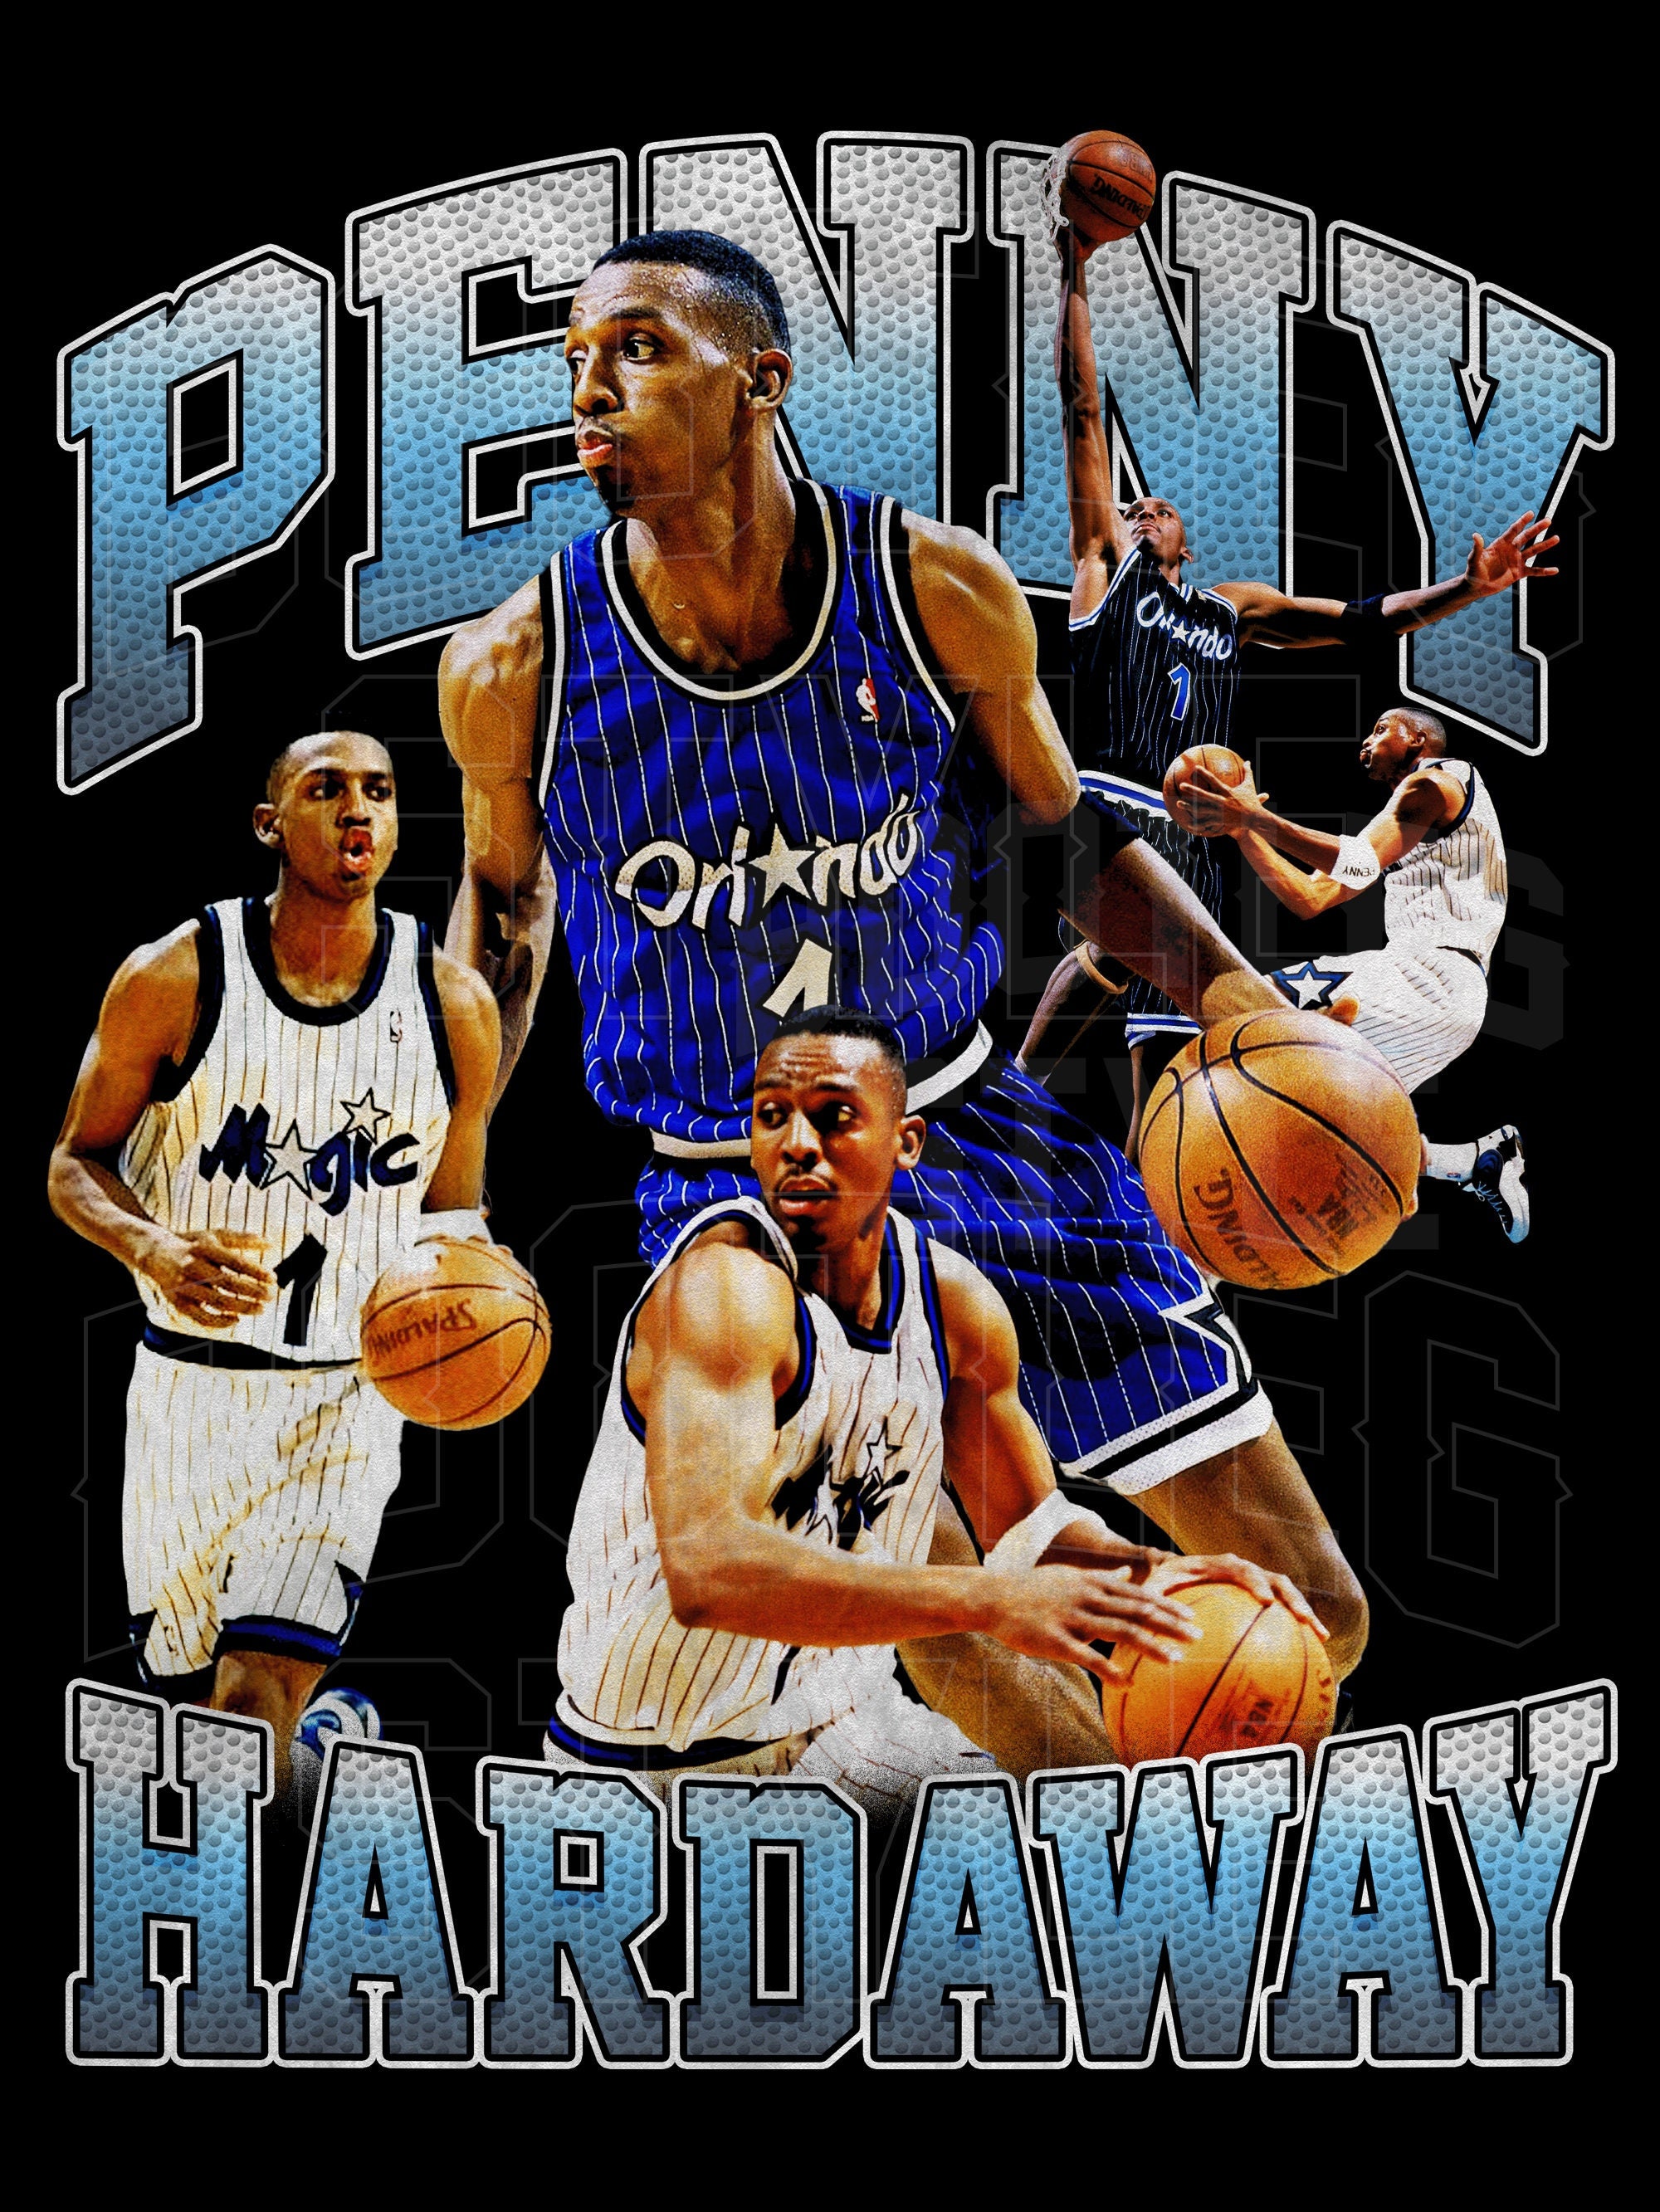 Vintage Nike T-shirt / Penny Hardaway Graphic / Made in USA